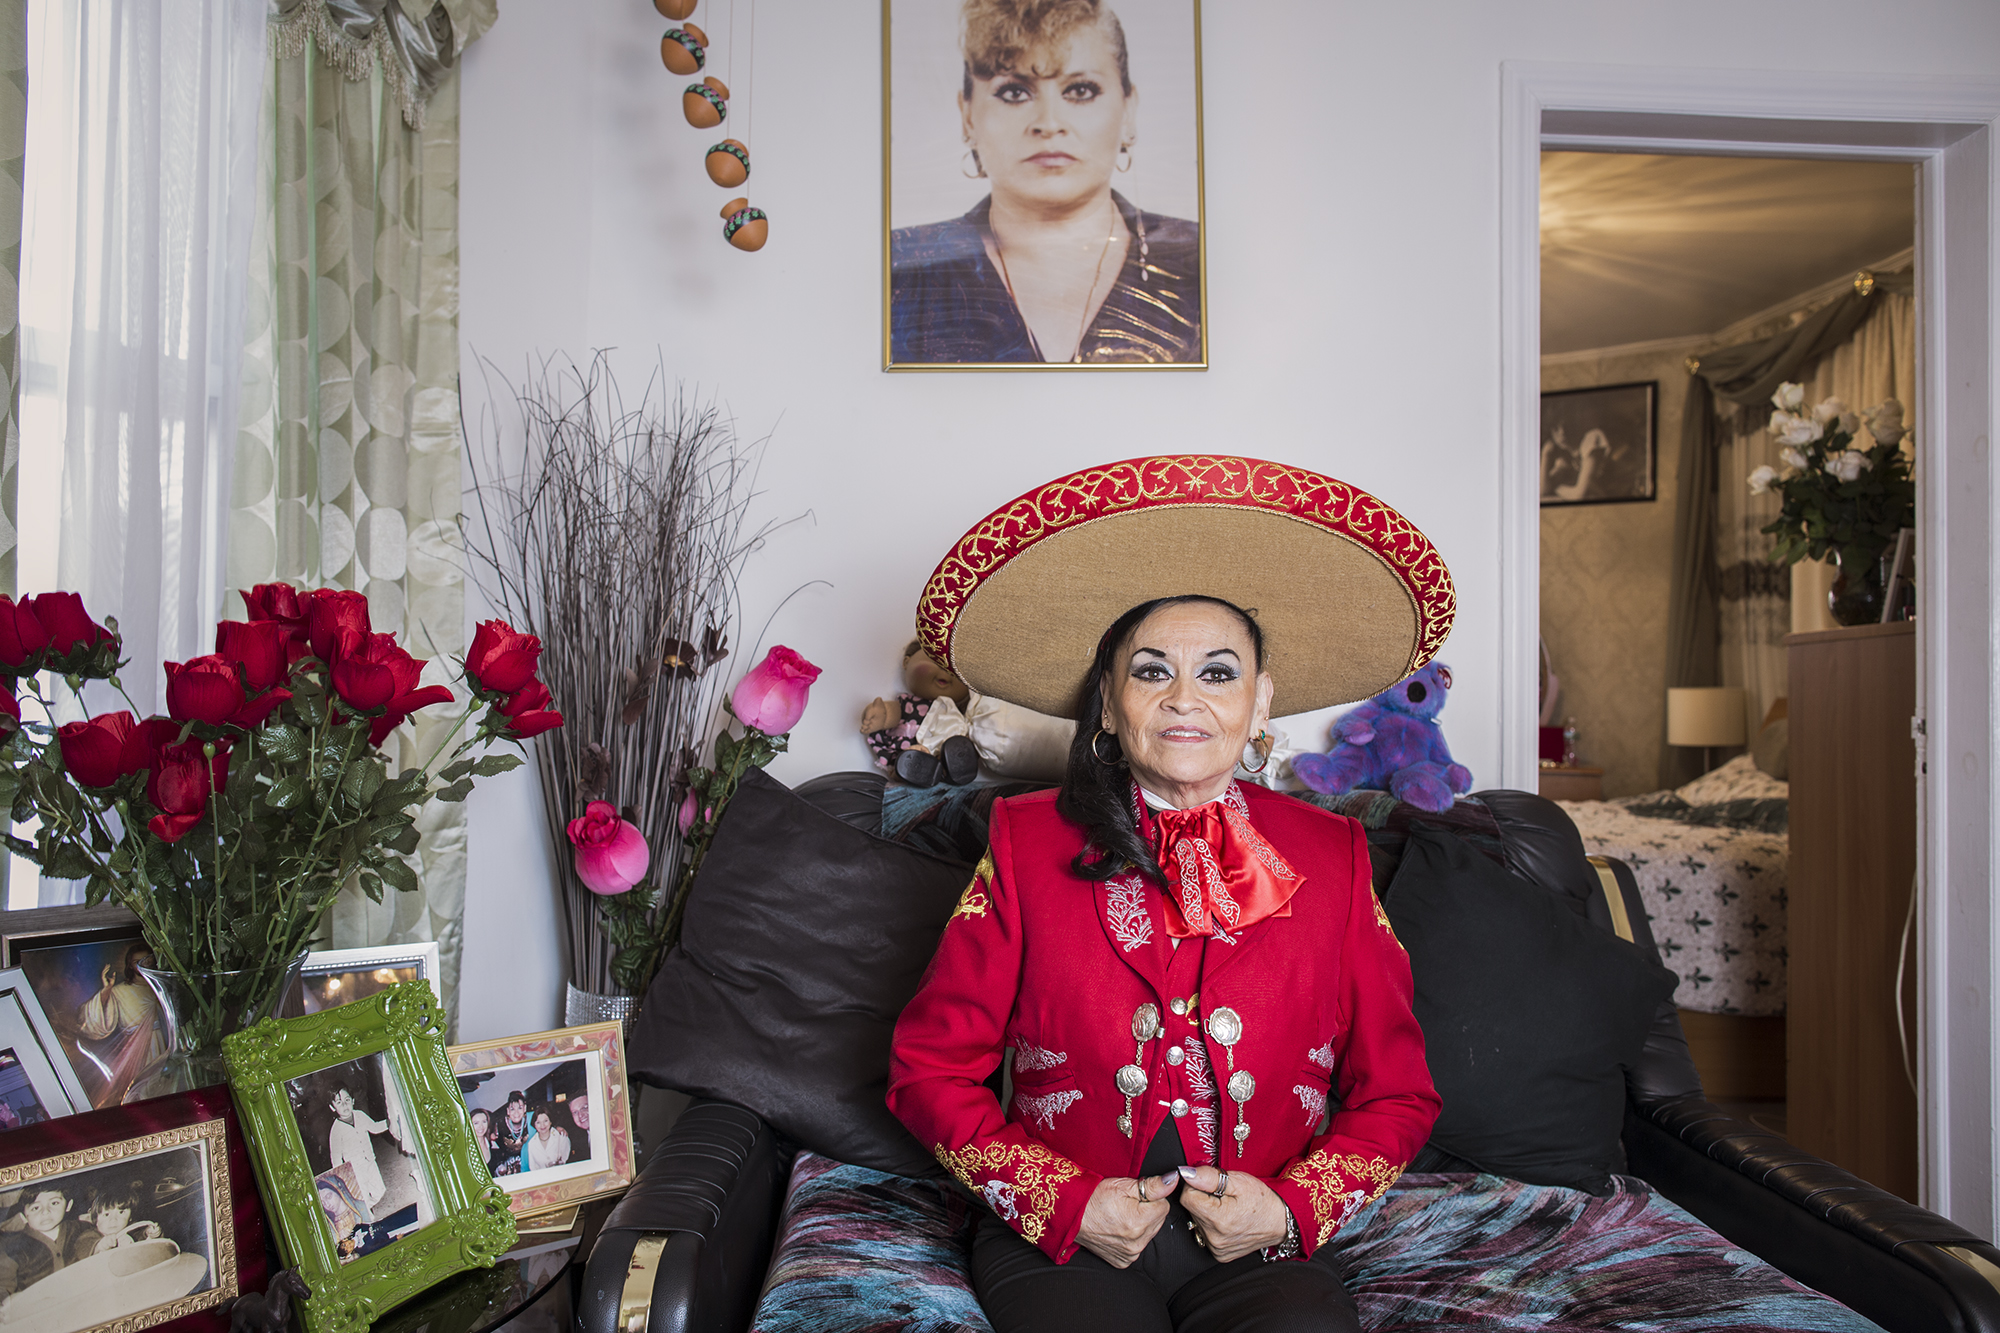  Yolanda Leticia is a mariachi singer from Veracruz, México, and coordinator and teacher of the Mariachi Academy for children in New York. In her house in Jamaica, Queens, she has a studio where she rehearses her singing. Yolanda is considered the Qu